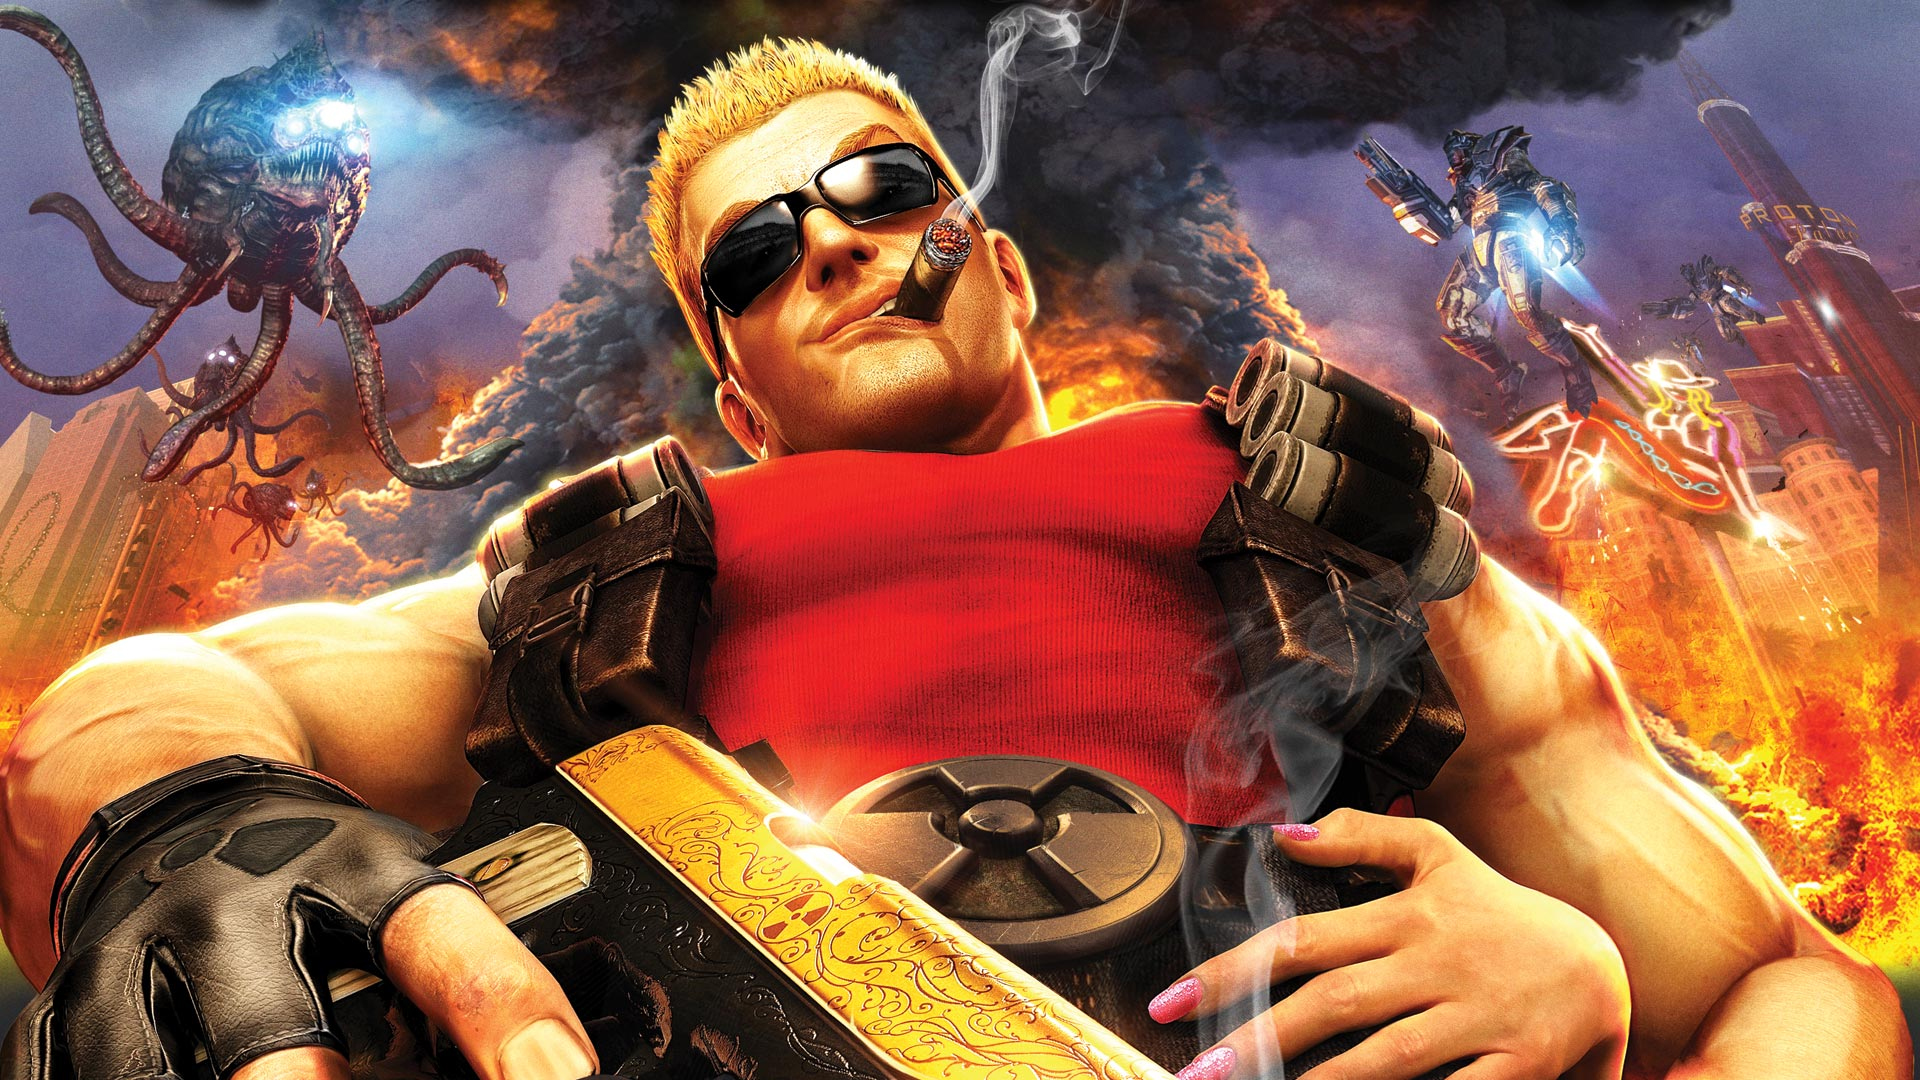 video game heroes with DUI's  - Duke Nukem